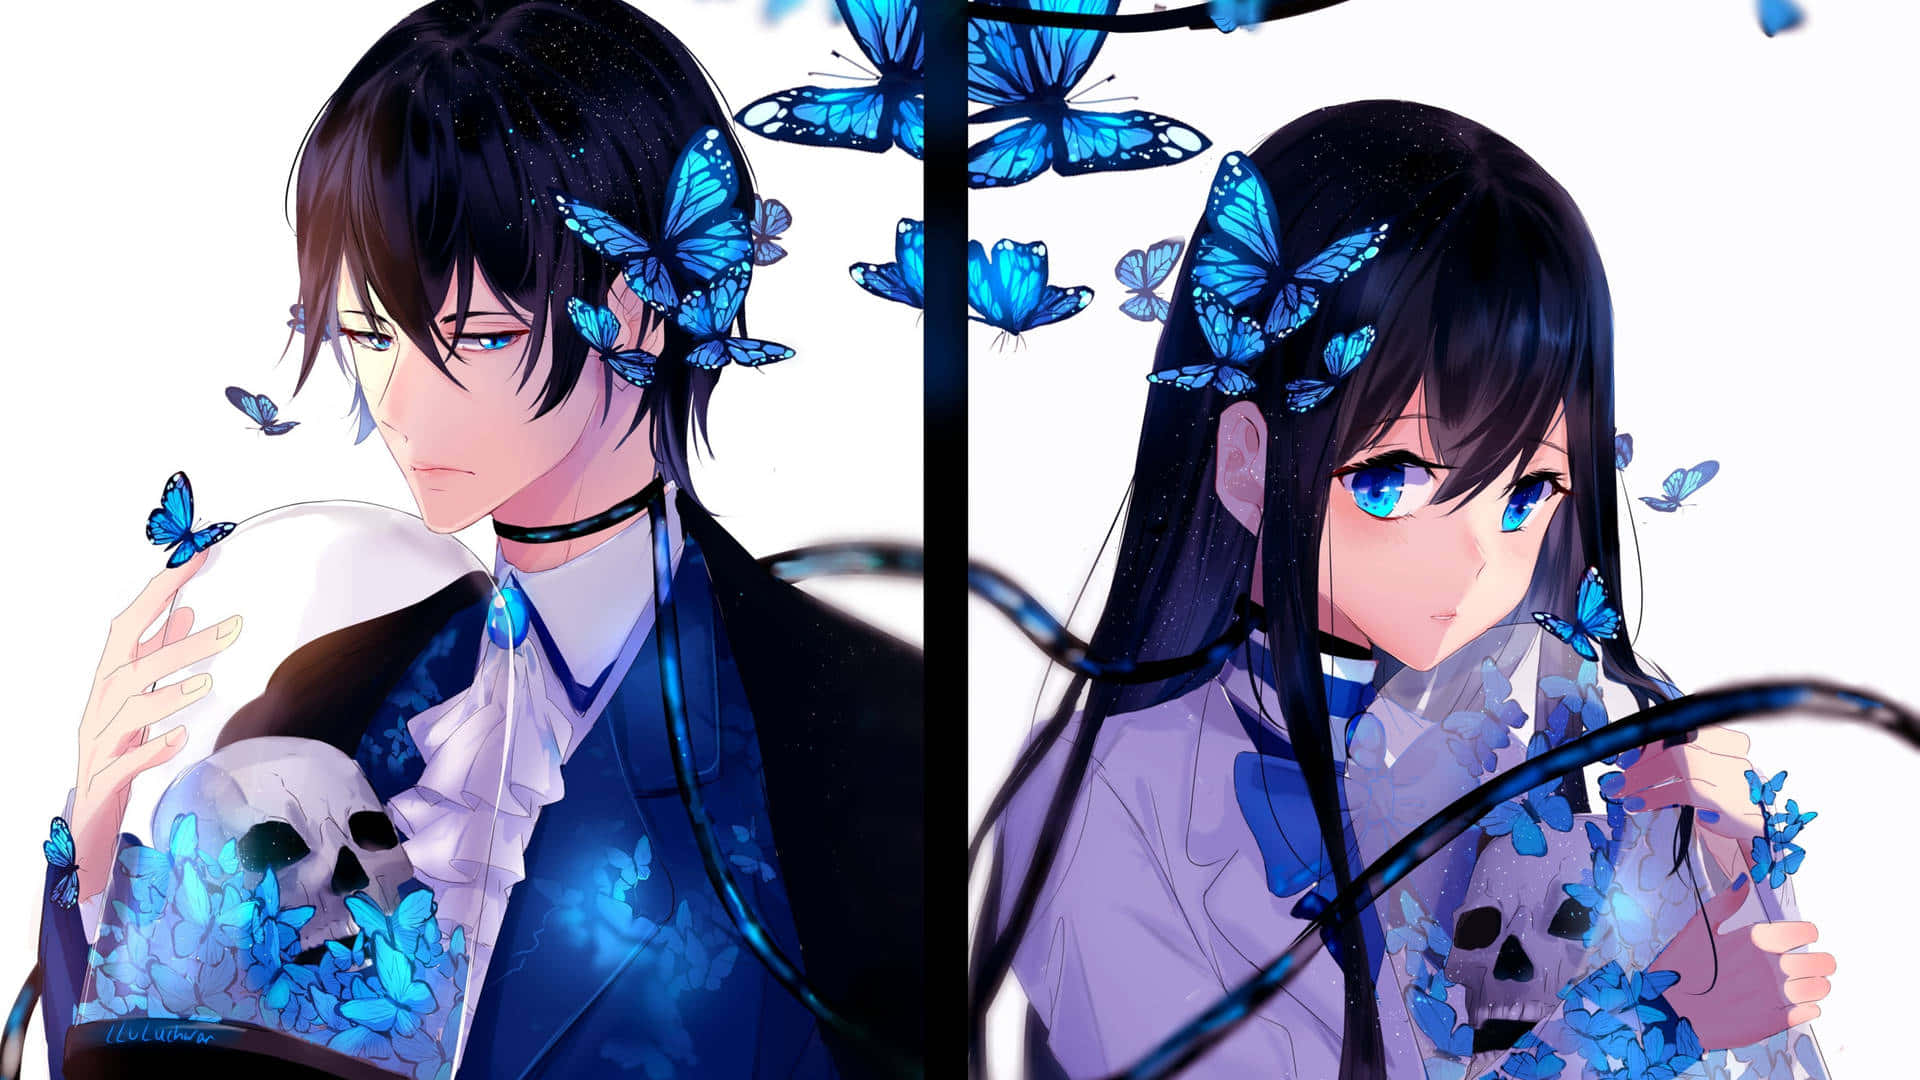 Cute Anime Couple - Anime Boy And Girl PNG Image | Transparent PNG Free  Download on SeekPNG